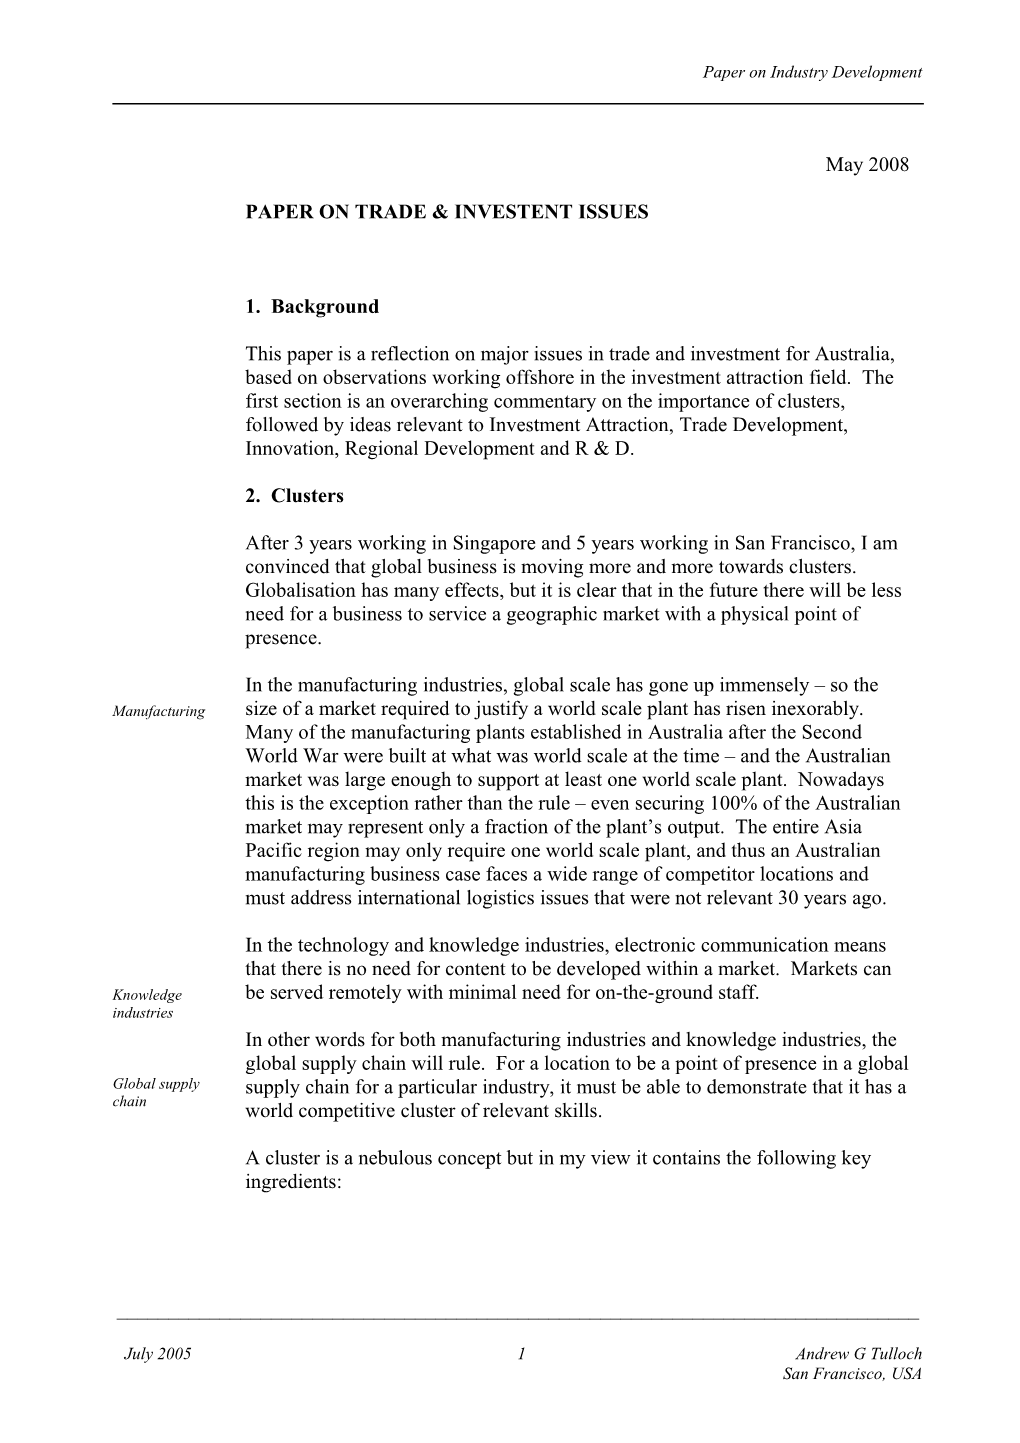 Paper on Trade & Investent Issues